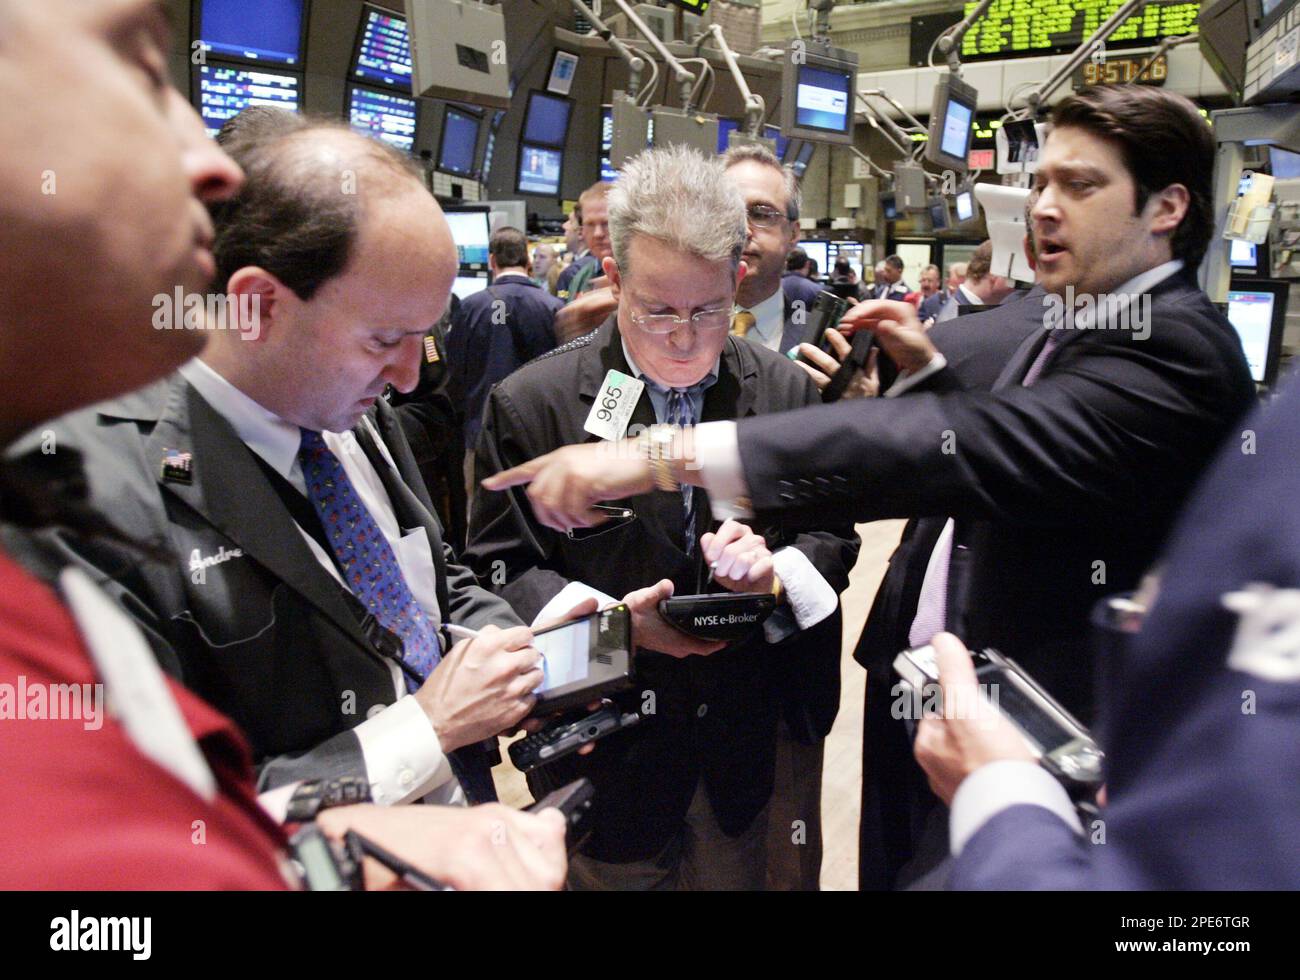 https://c8.alamy.com/comp/2PE6TGR/specialist-greg-zenna-right-directs-trading-in-shares-of-verizon-on-the-floor-of-the-new-york-stock-exchange-tuesday-morning-may-3-2005-the-three-month-bidding-war-for-long-distance-provider-mci-ended-monday-as-qwest-dropped-out-after-mci-agreed-to-an-854-billion-deal-with-verizon-and-rejected-a-higher-priced-offer-from-qwest-for-the-fourth-time-ap-photorichard-drew-2PE6TGR.jpg